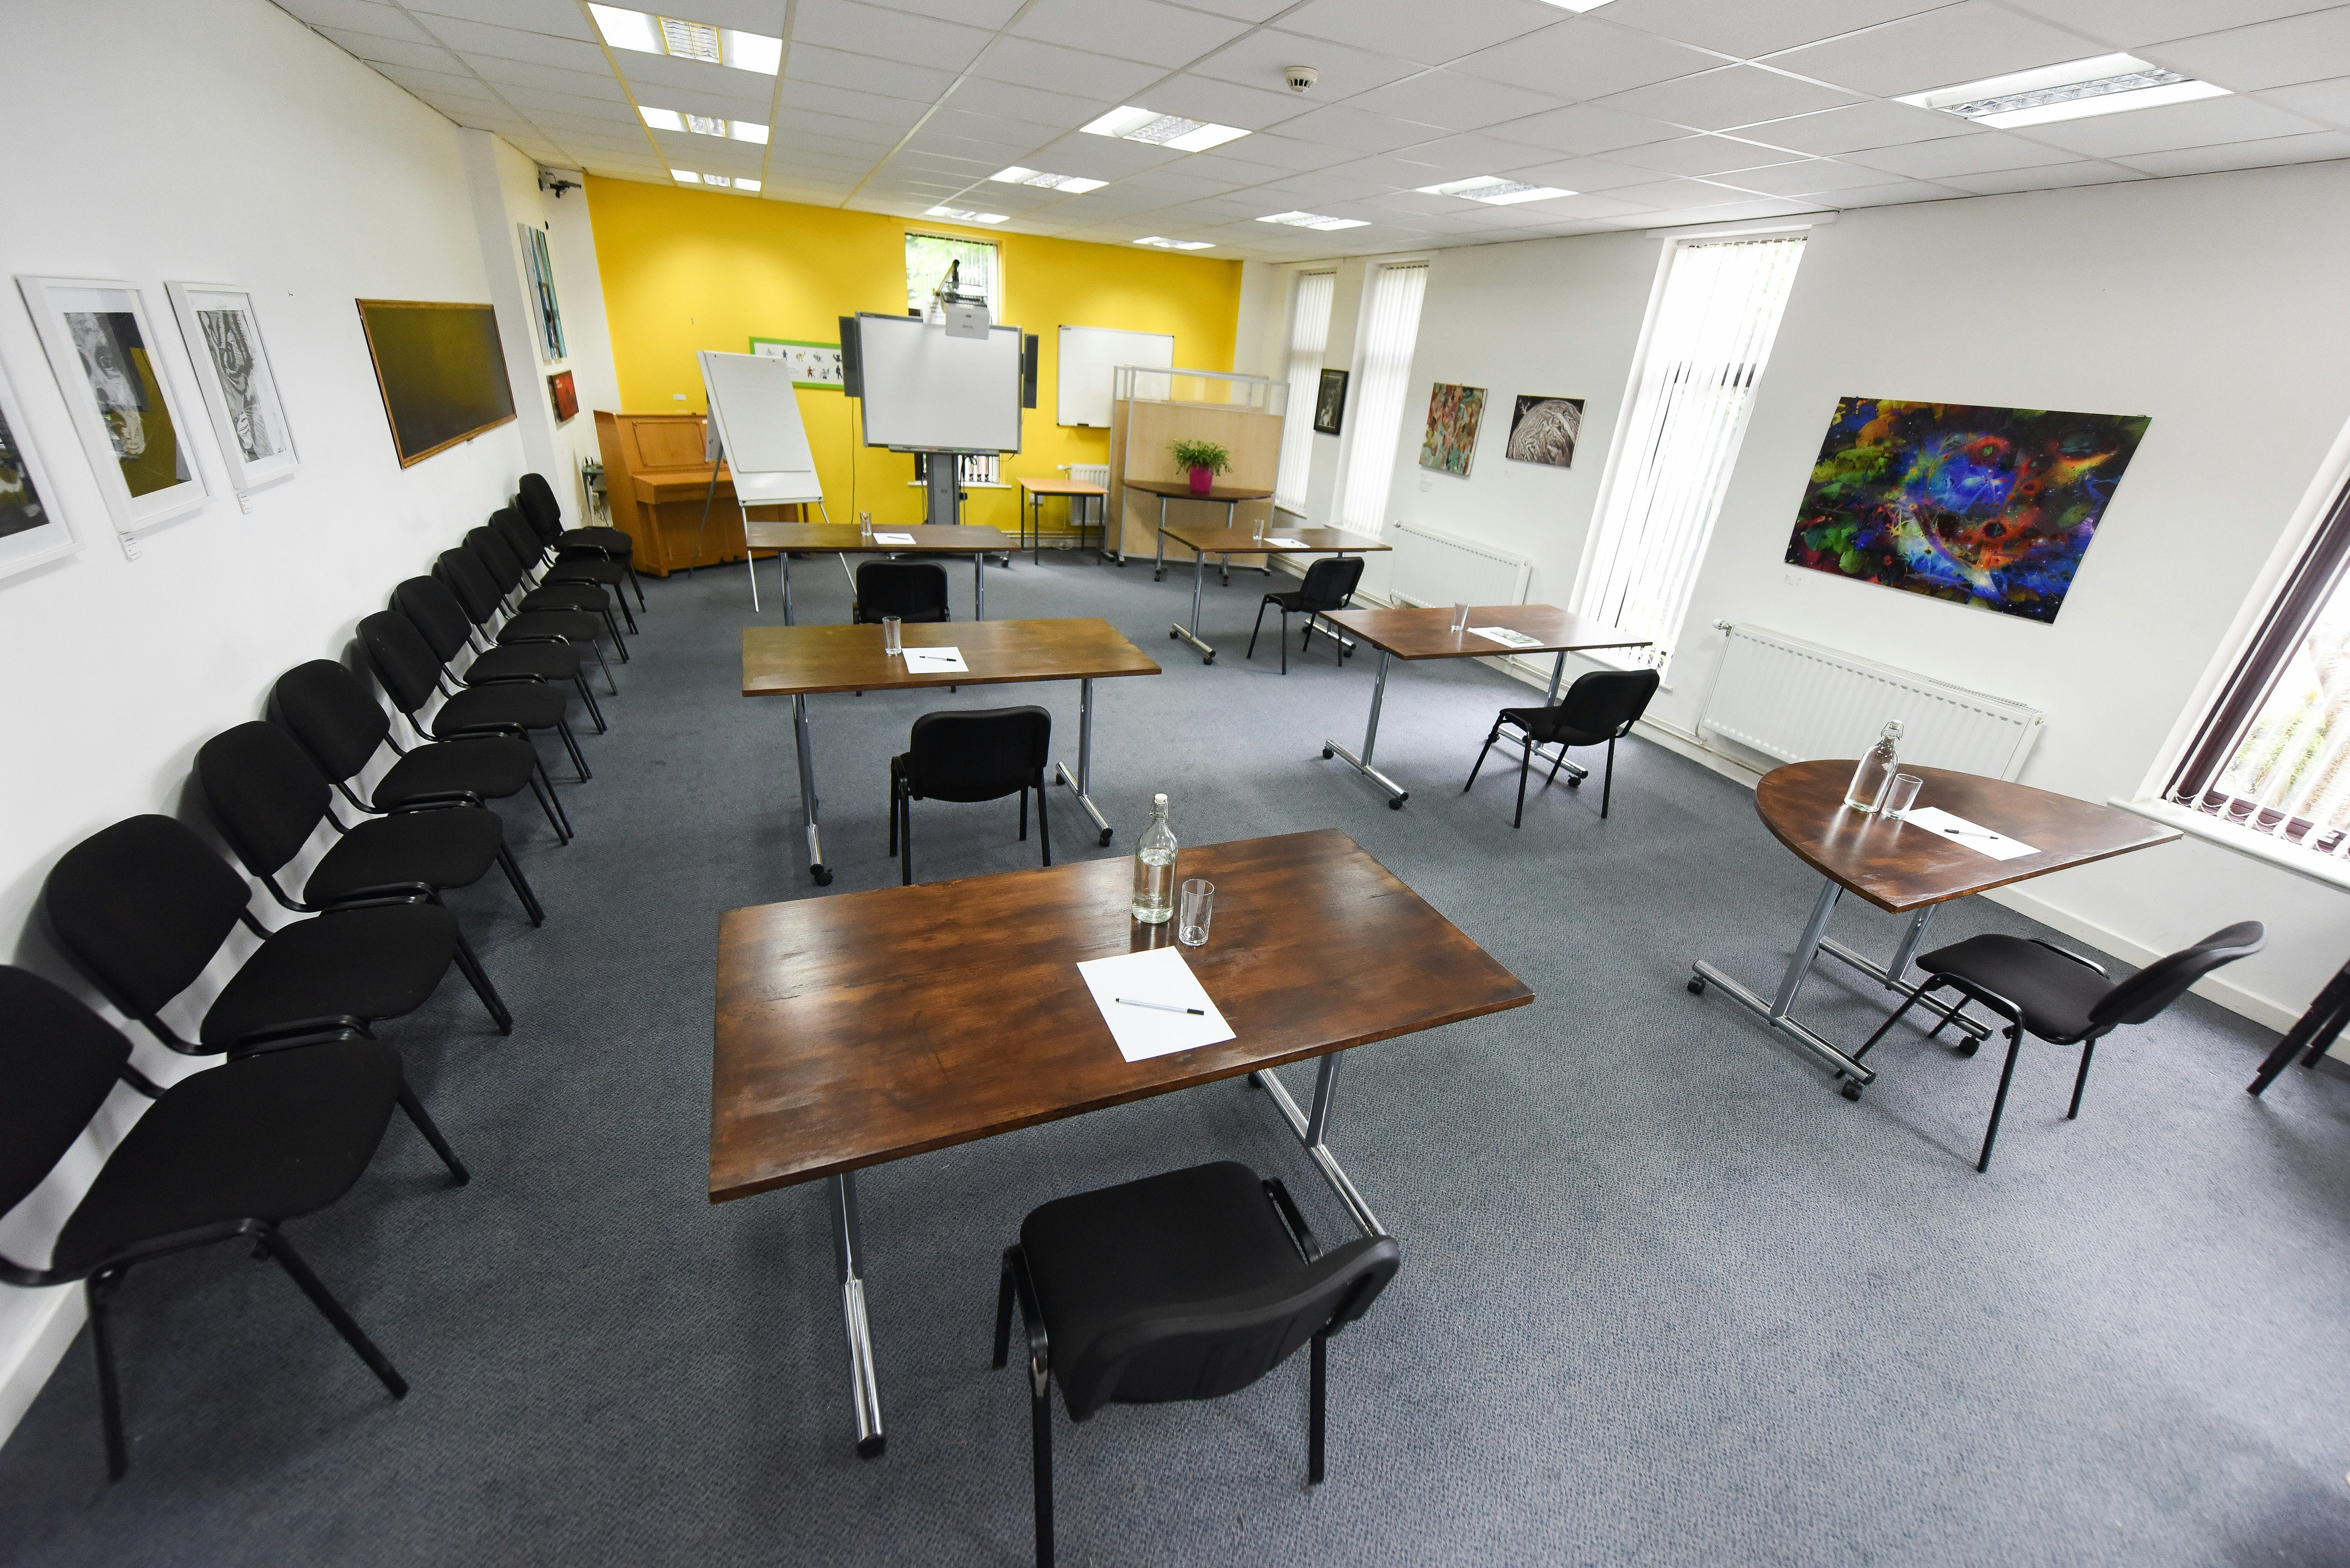 The Brain Charity - The Meeting Room image 4